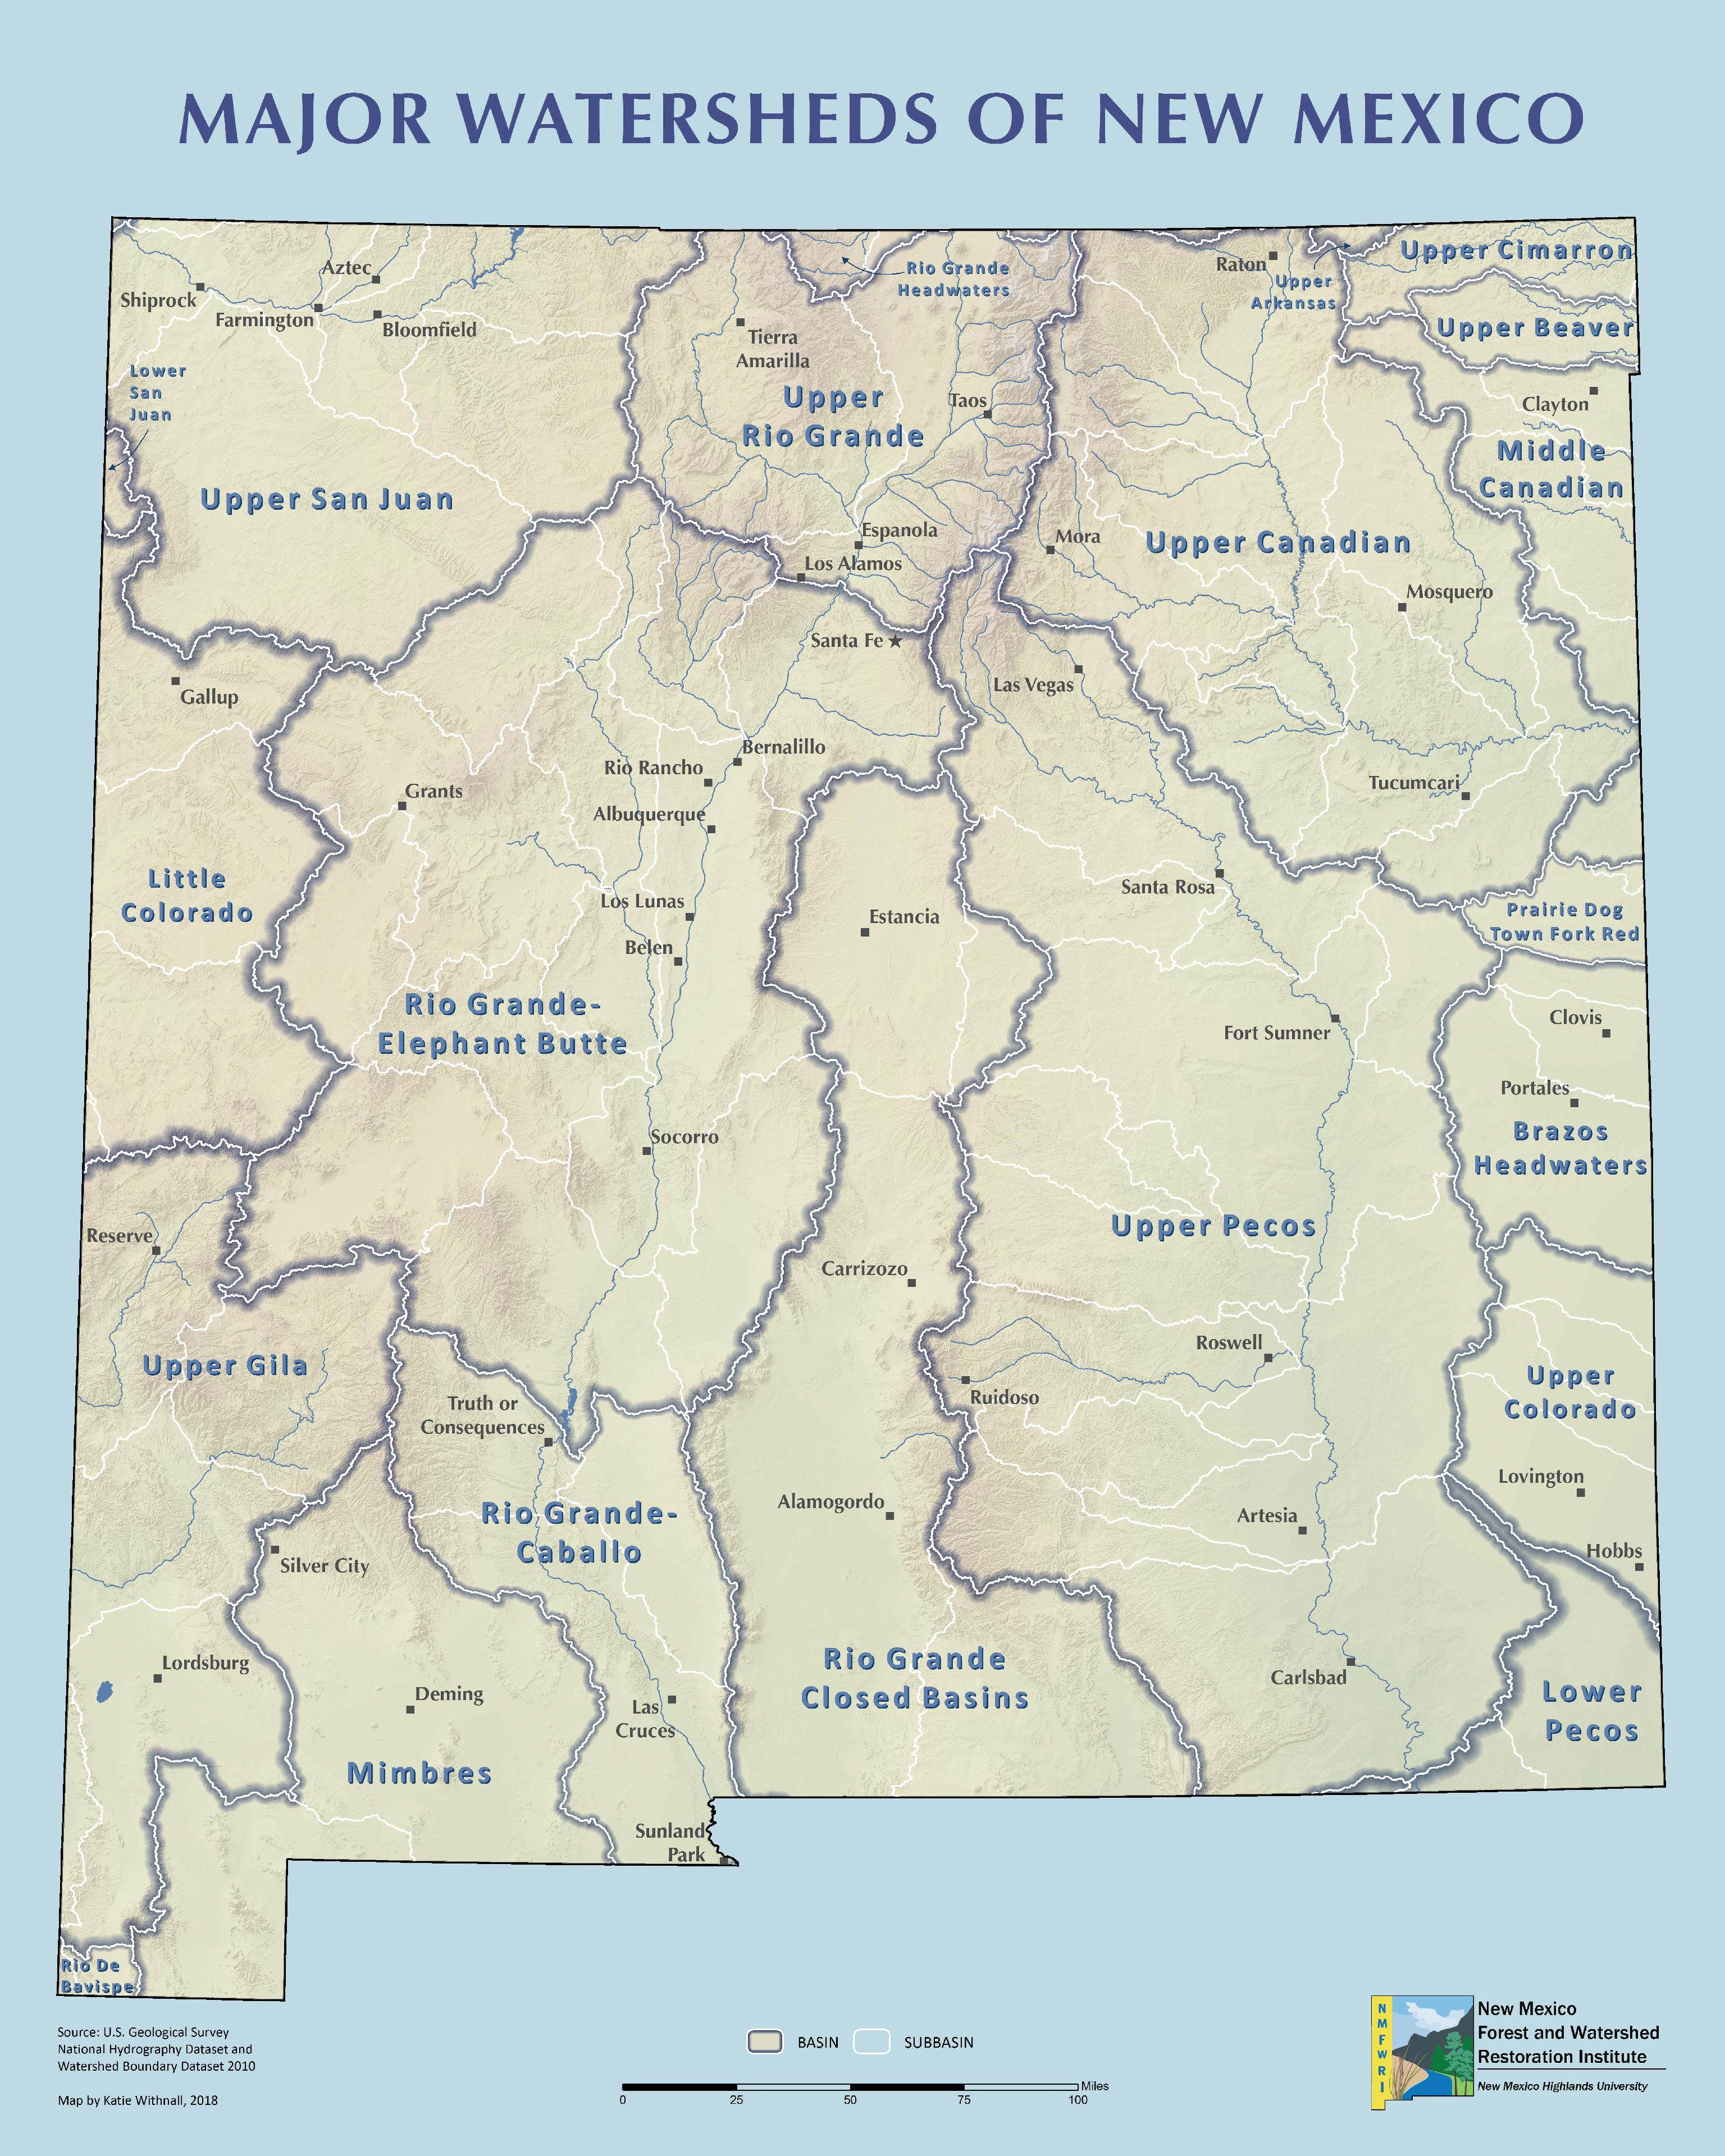 Major Watersheds in New Mexico